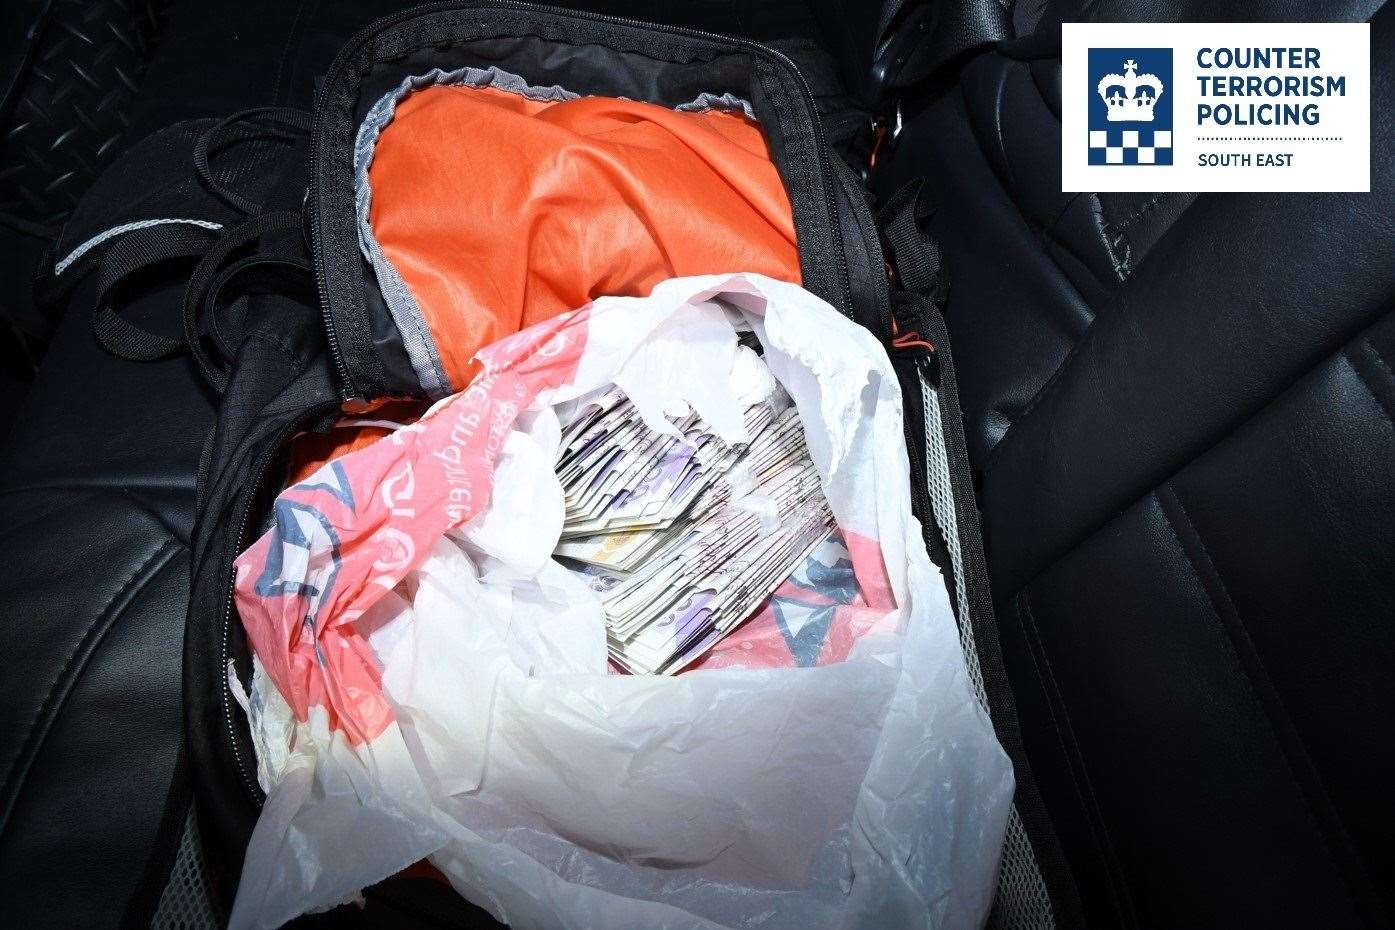 Money inside a rucksack recovered by police from Edward Little when he was arrested en route to buy a gun (Counter Terrorism Policing South East/PA)